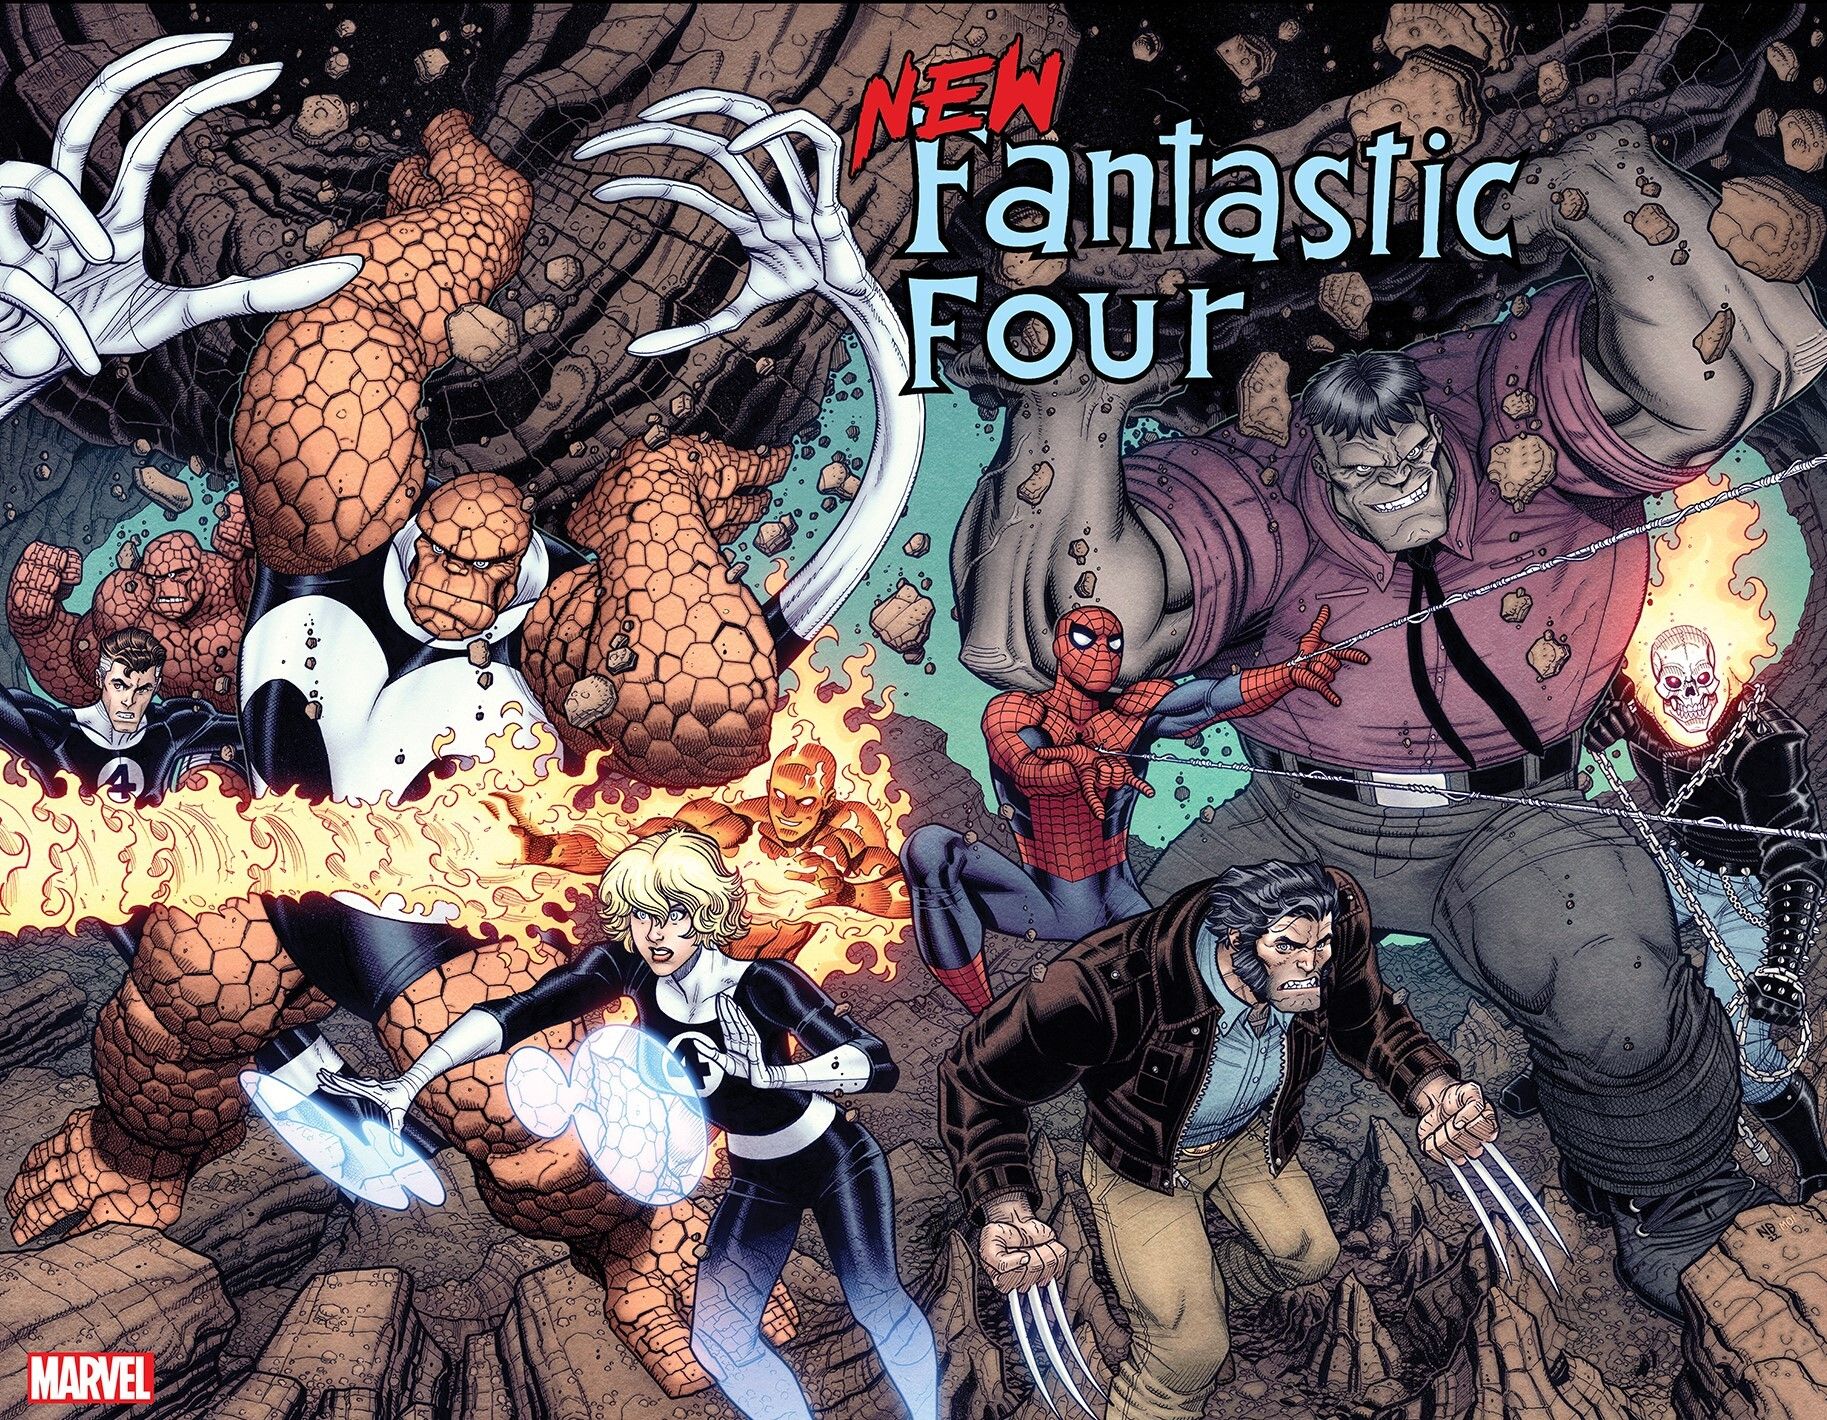 Cover for New Fantastic Four #1